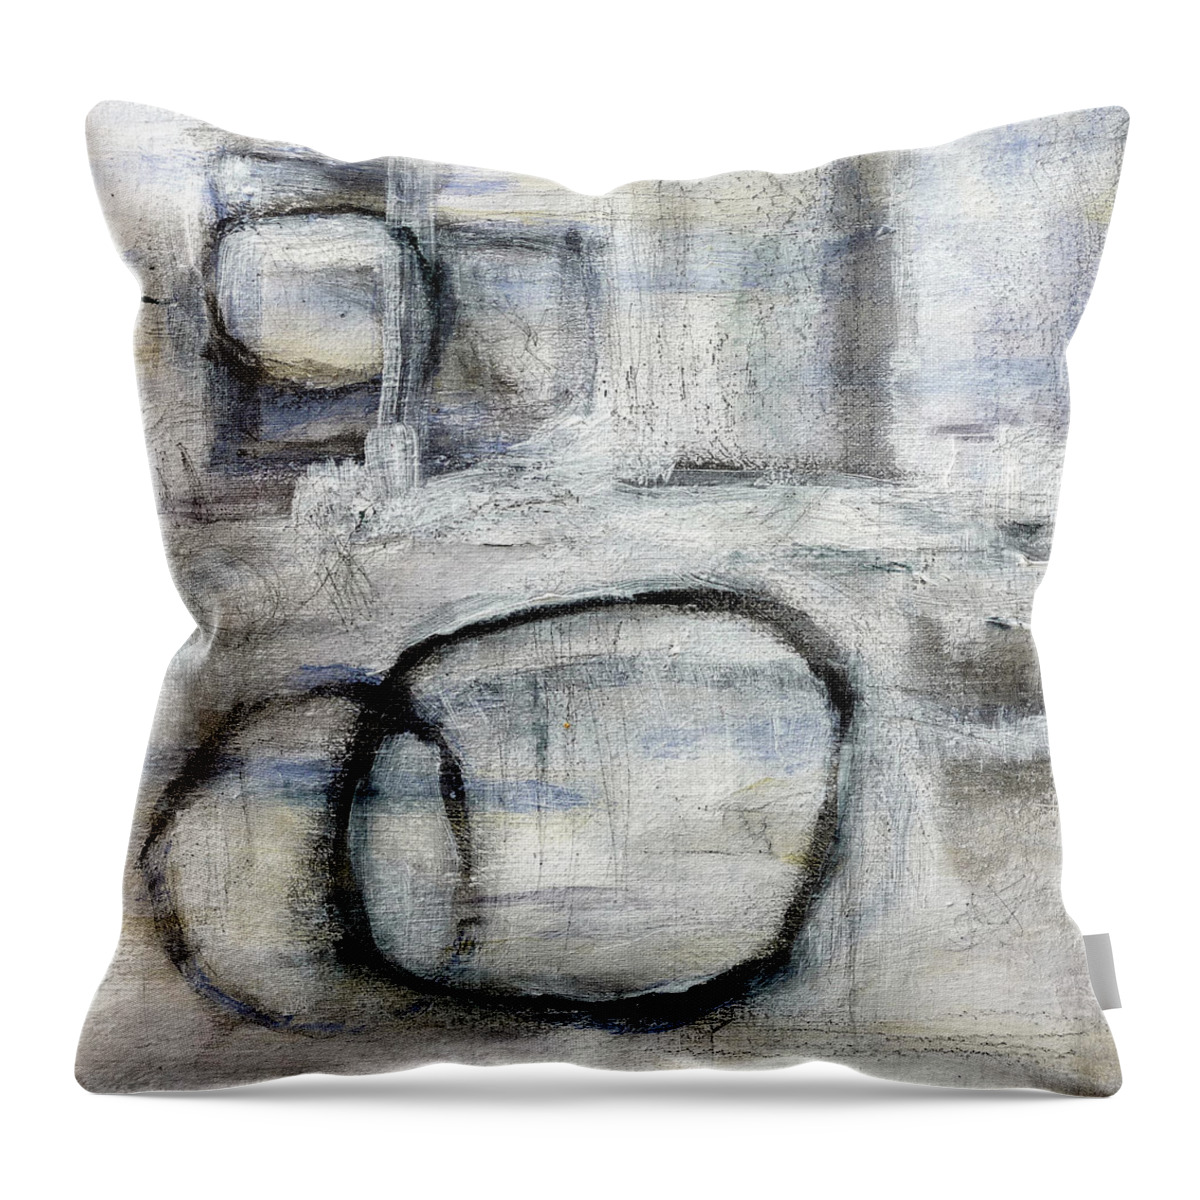 Abstract Throw Pillow featuring the painting Union by Jim Whalen